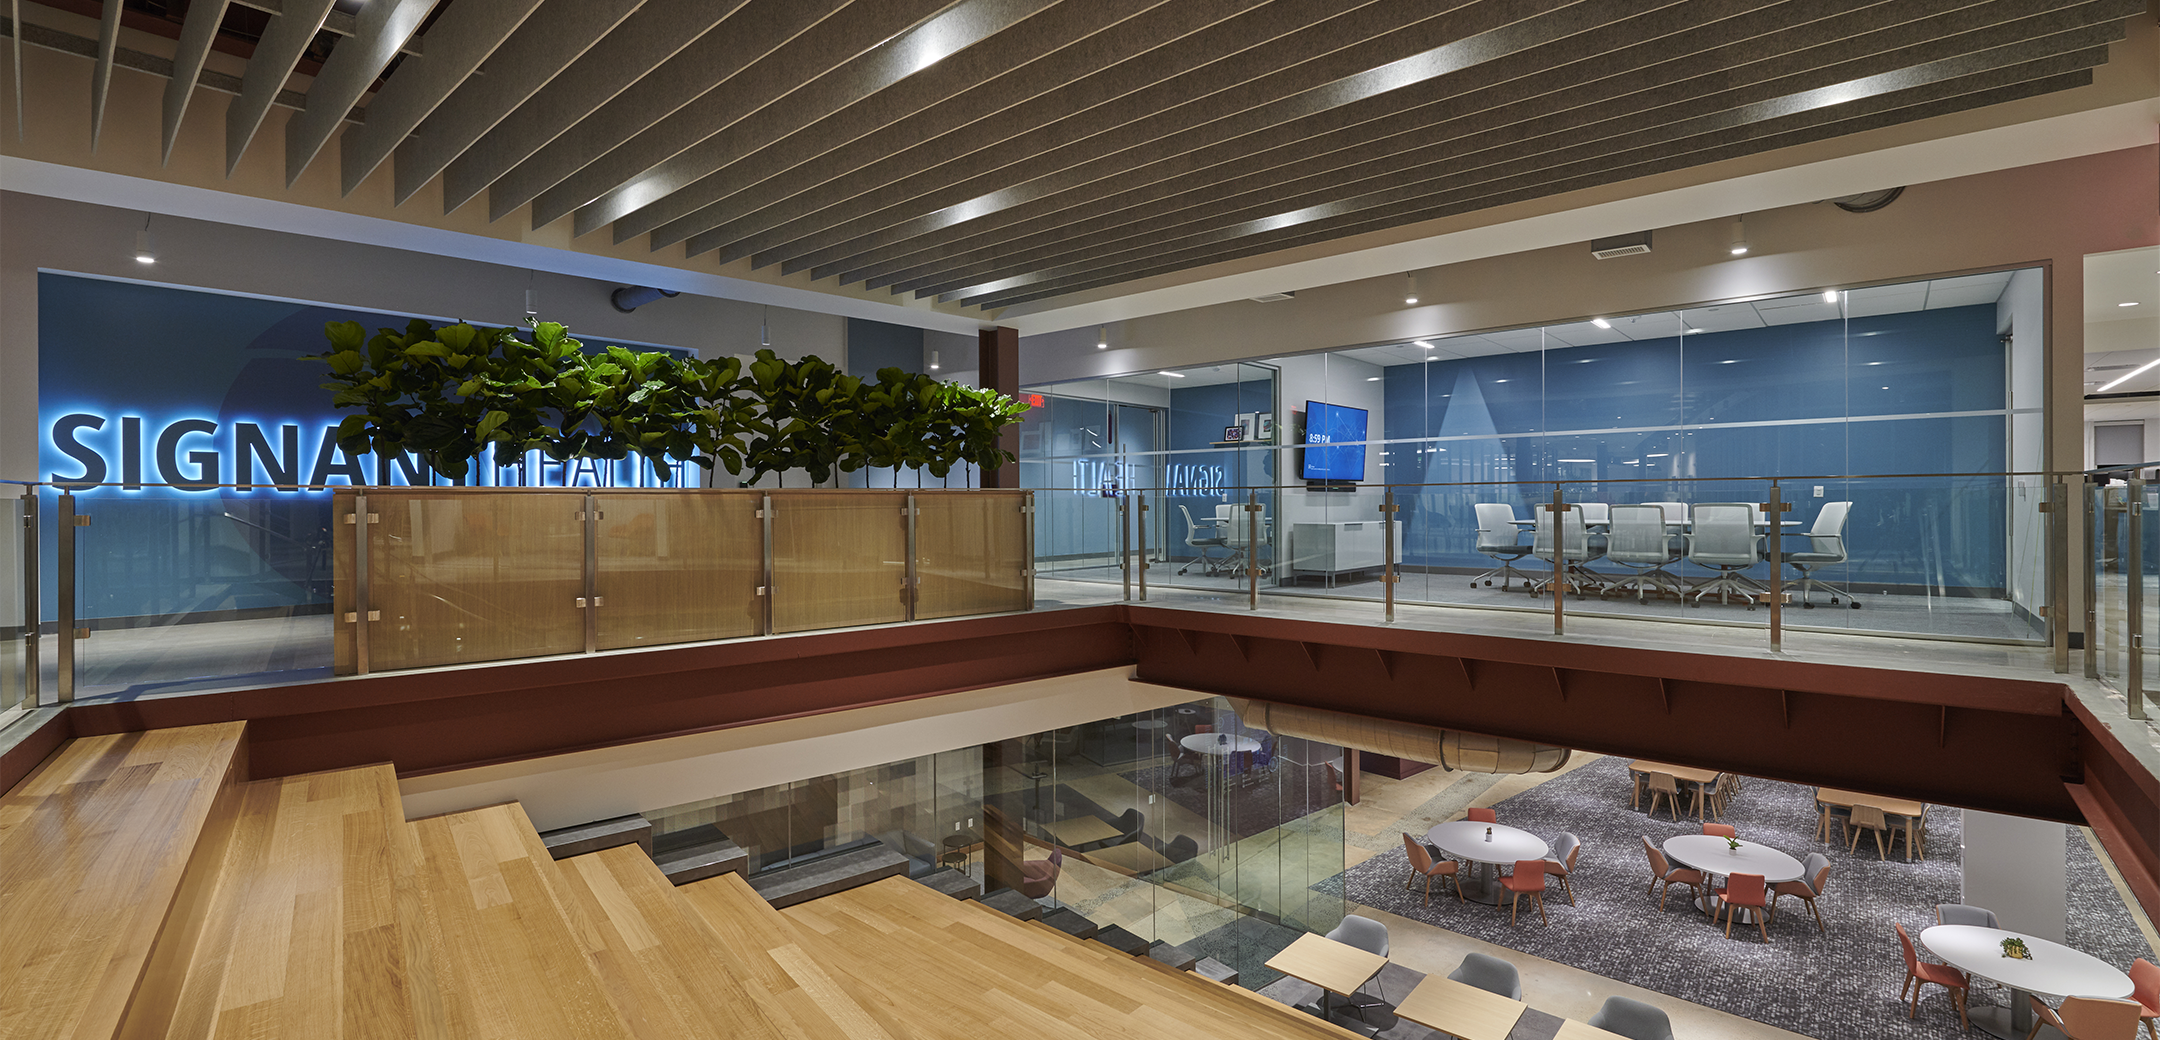 The interior space of Signant Health Headquarters featuring a wide communication staircase connecting the second floor of conference rooms and first floor of open space and tables.